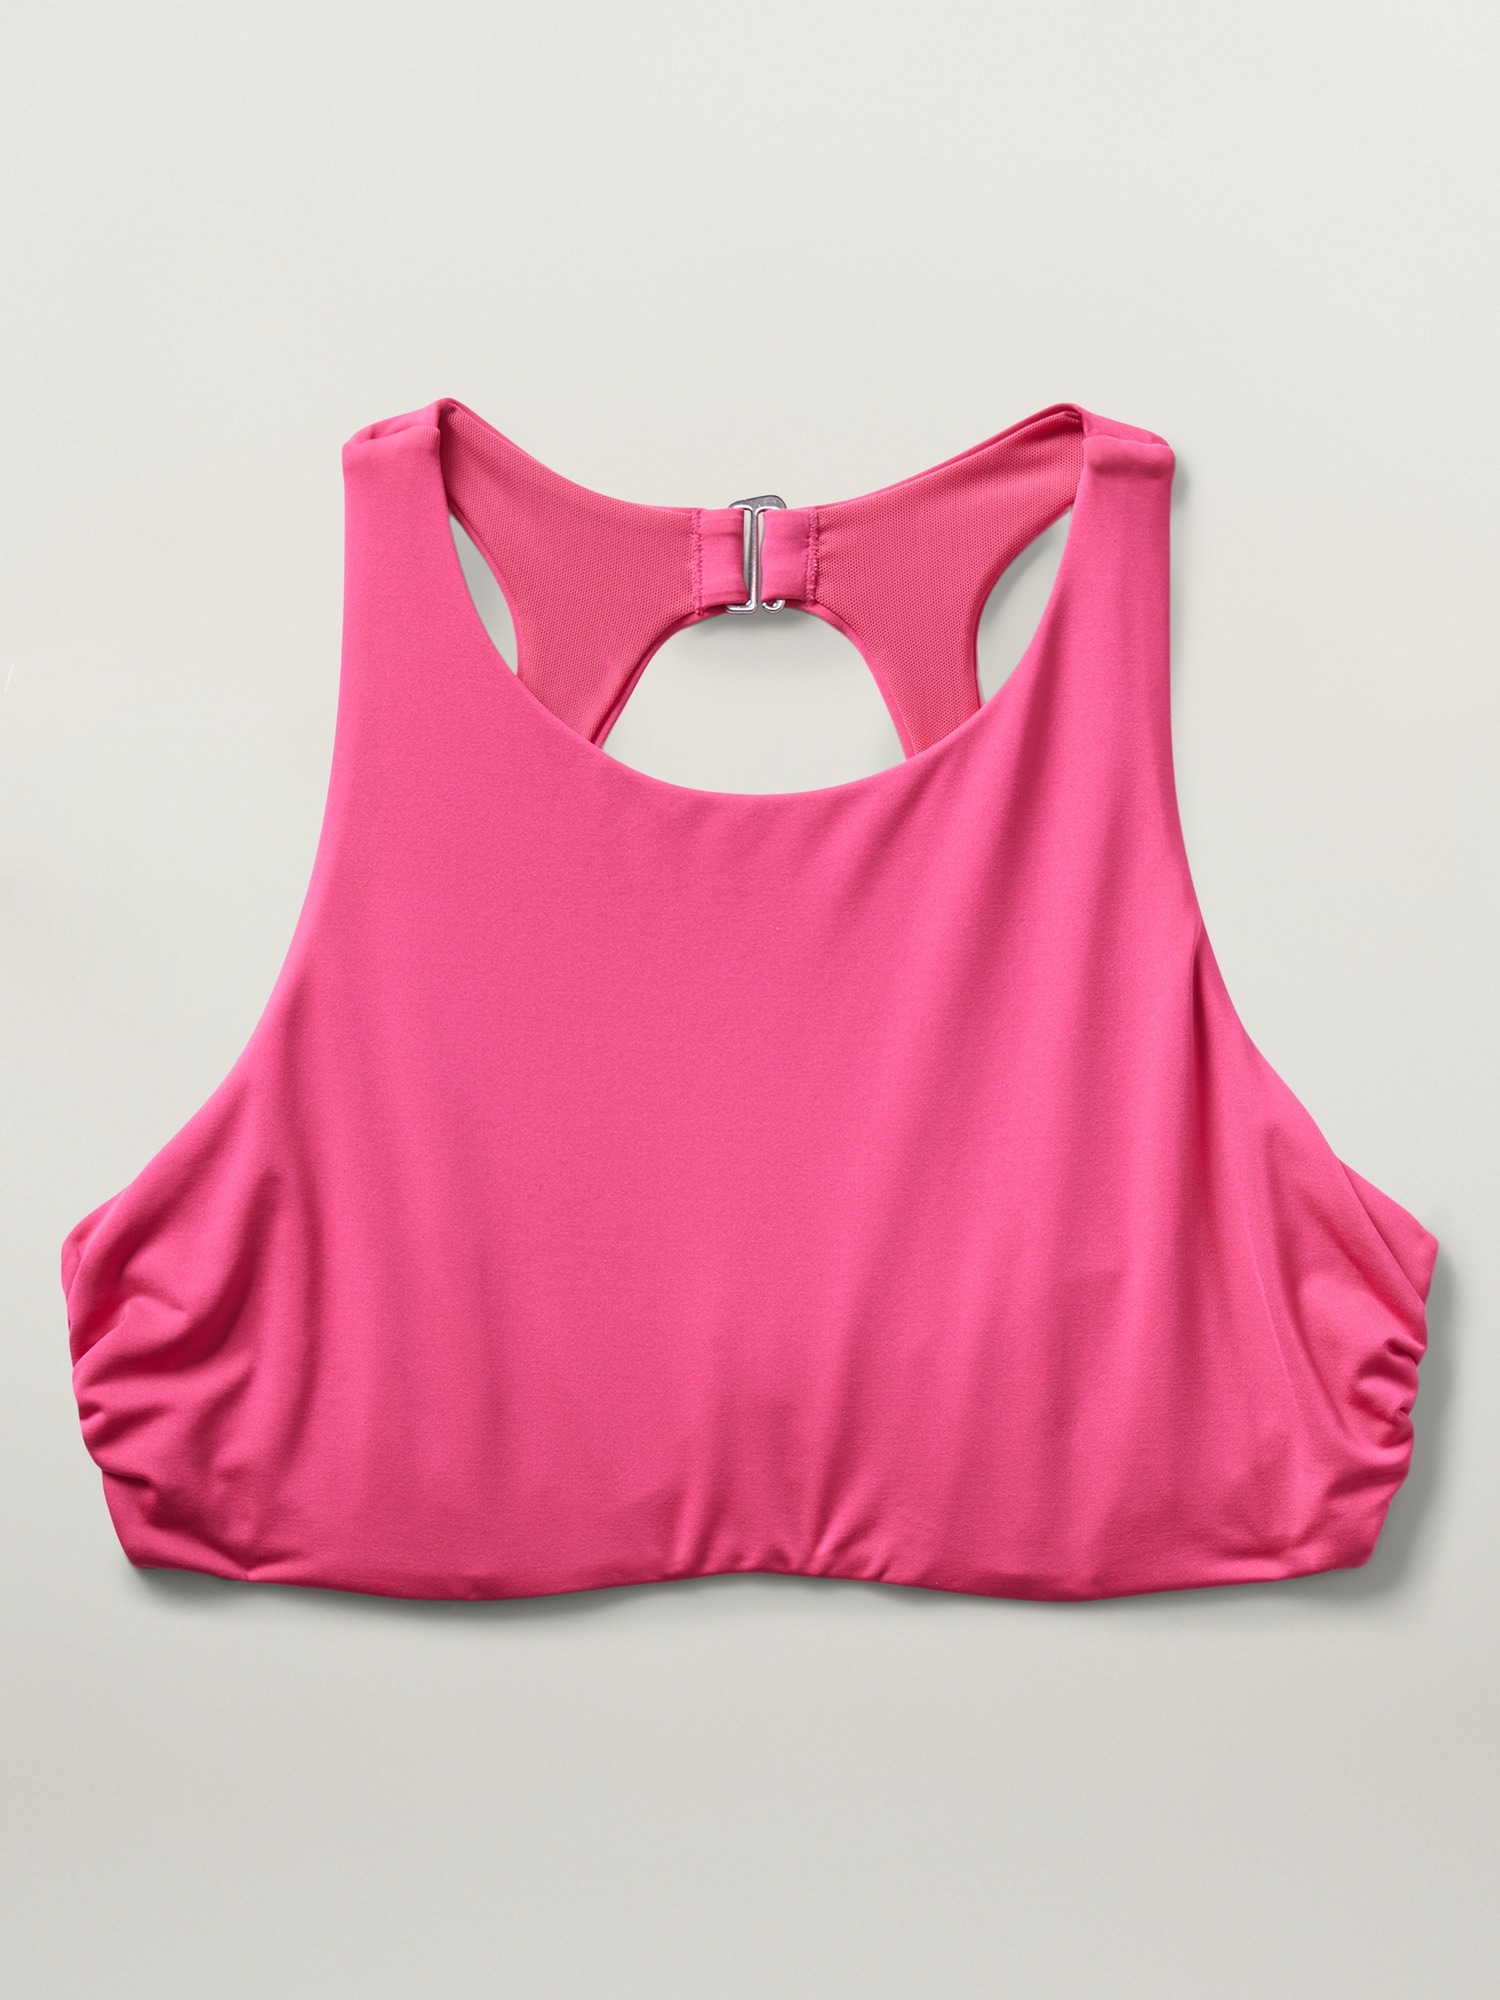 Athleta M Transcend Plunge Sports Bra Medium D-DD Maritime Pink nwt - $29  New With Tags - From Rob